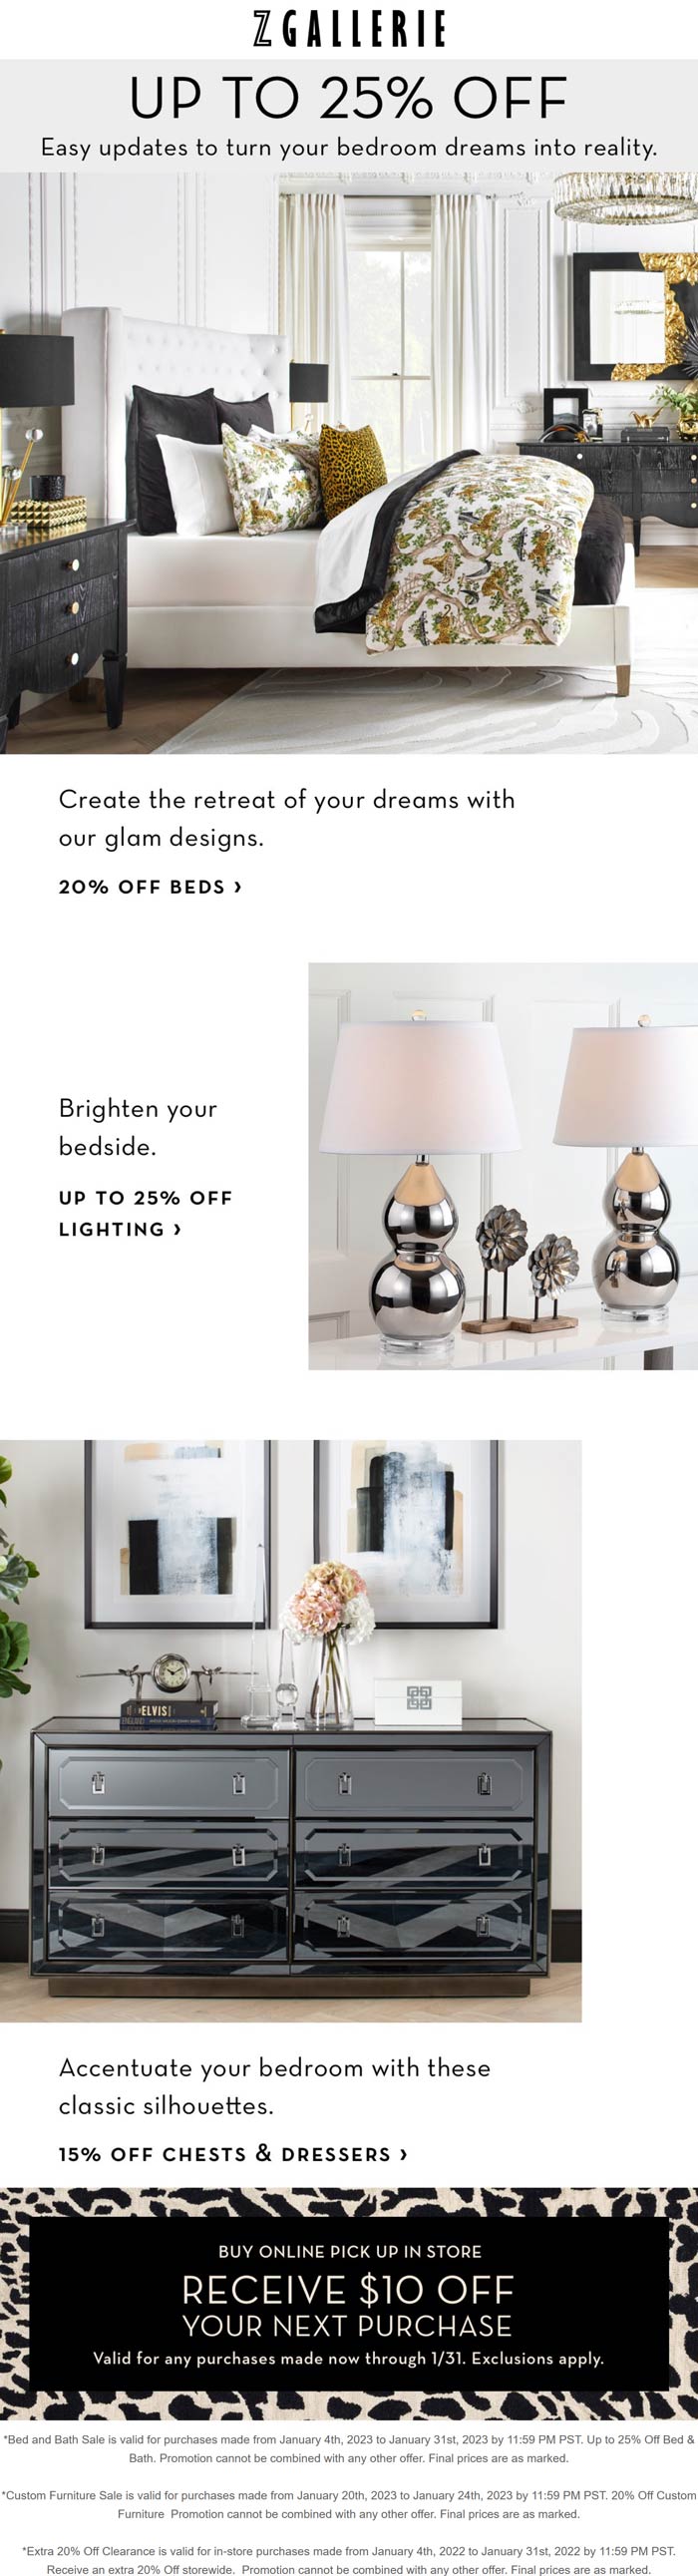 Z Gallerie stores Coupon  20-25% off bedroom, furniture & clearance at Z Gallerie #zgallerie 